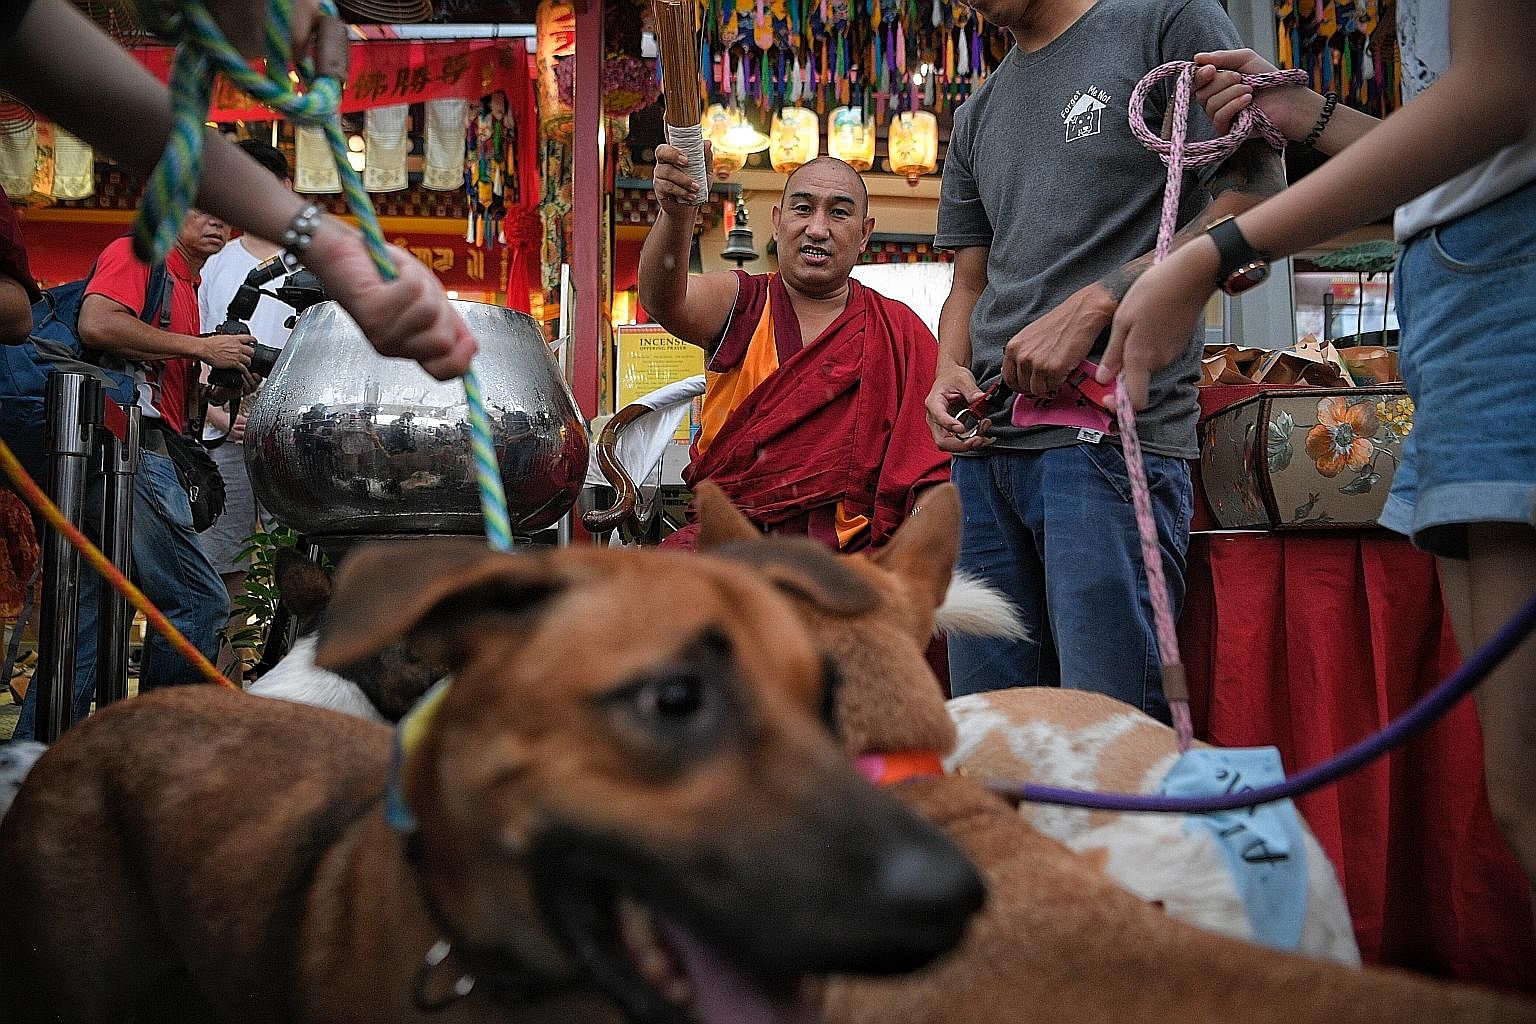 Buddhists traditionally release animals on Vesak Day but, for the first time, Thekchen Choling, a Tibetan Buddhist temple in Beatty Lane in Jalan Besar, decided to mark it by holding an adoption drive for strays, in collaboration with four animal wel